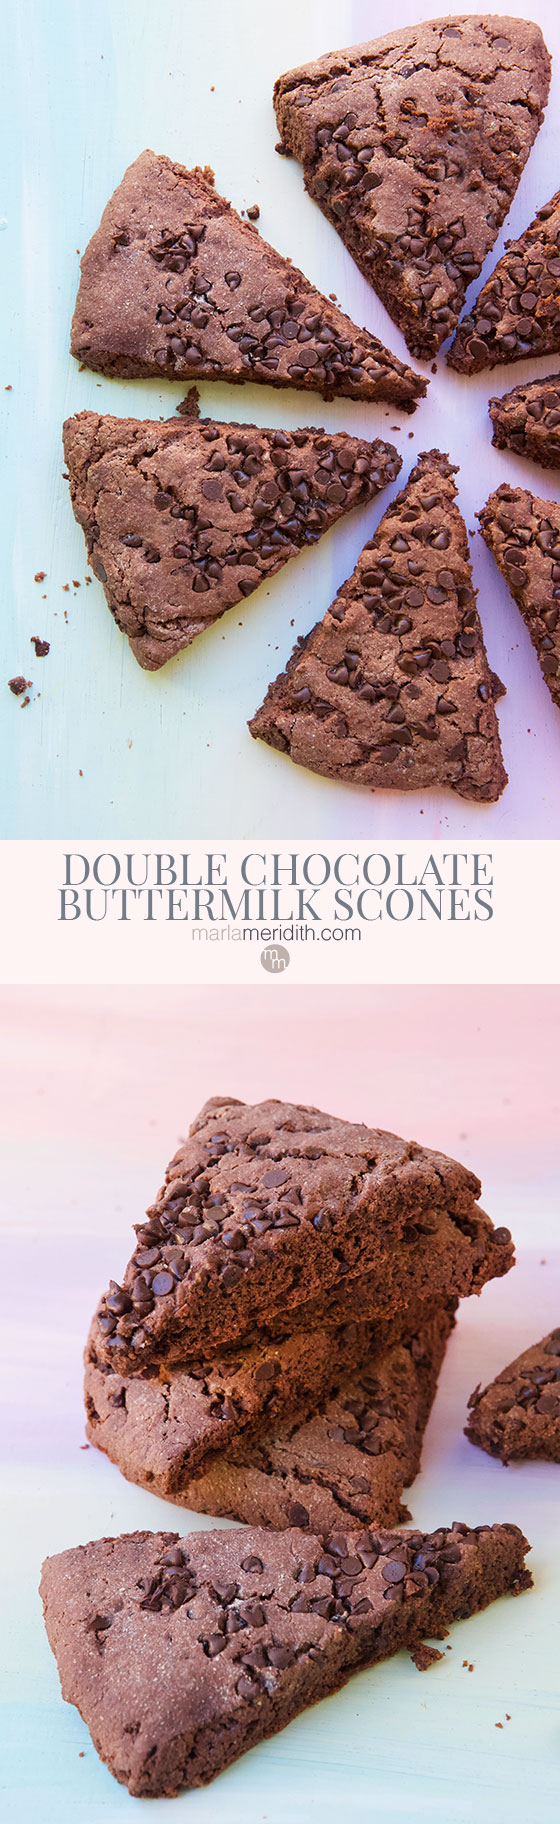 A family favorite! Try this Double Chocolate Buttermilk Scones recipe, great for any time of the day. Chocolate lovers will swoon over all the chocolate goodness packed inside. MarlaMeridith.com